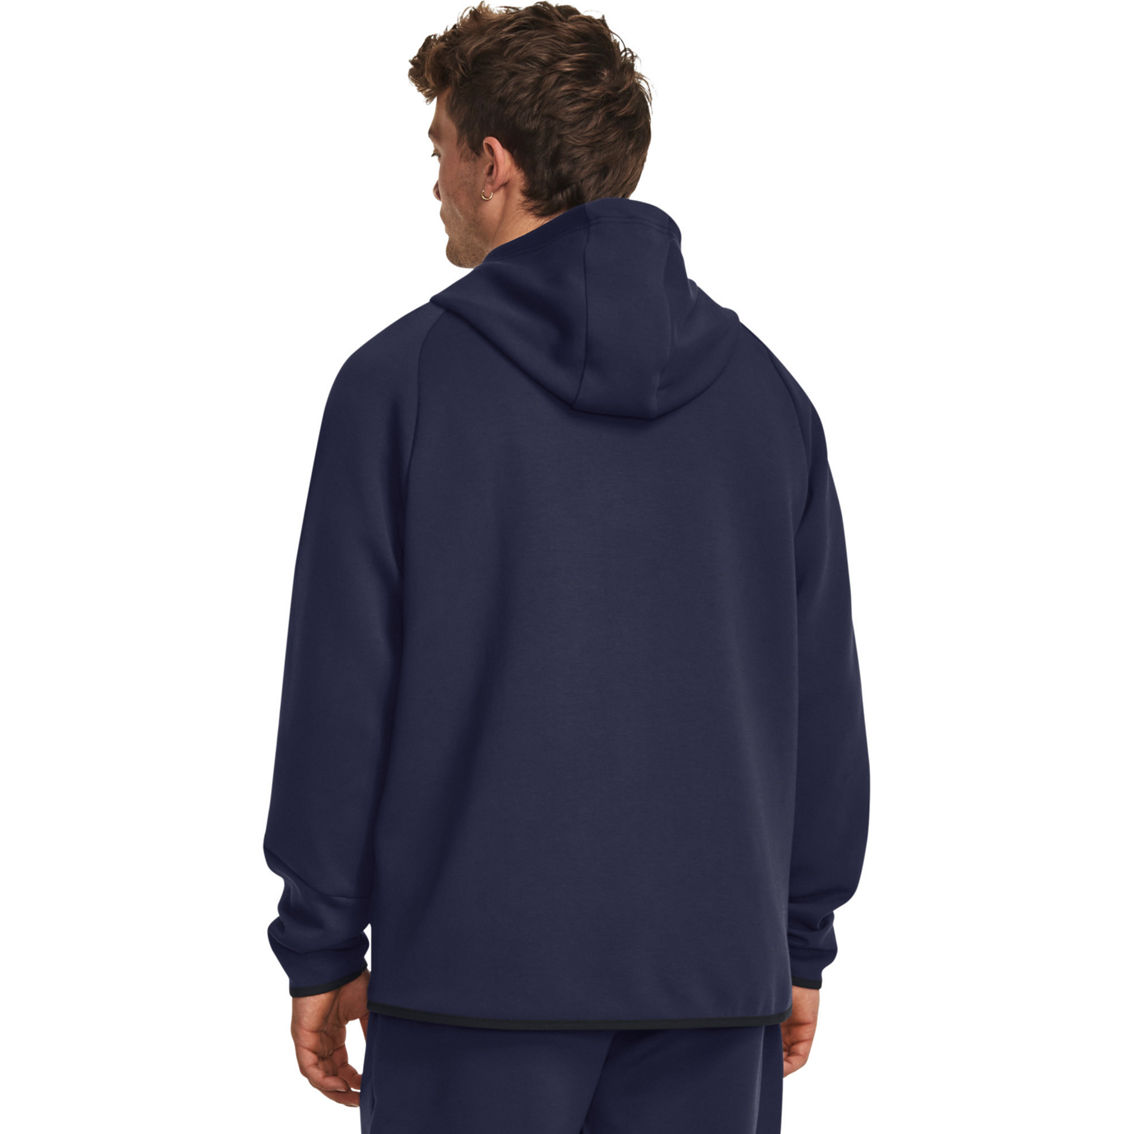 Under Armour Unstoppable Fleece Full Zip - Image 2 of 6